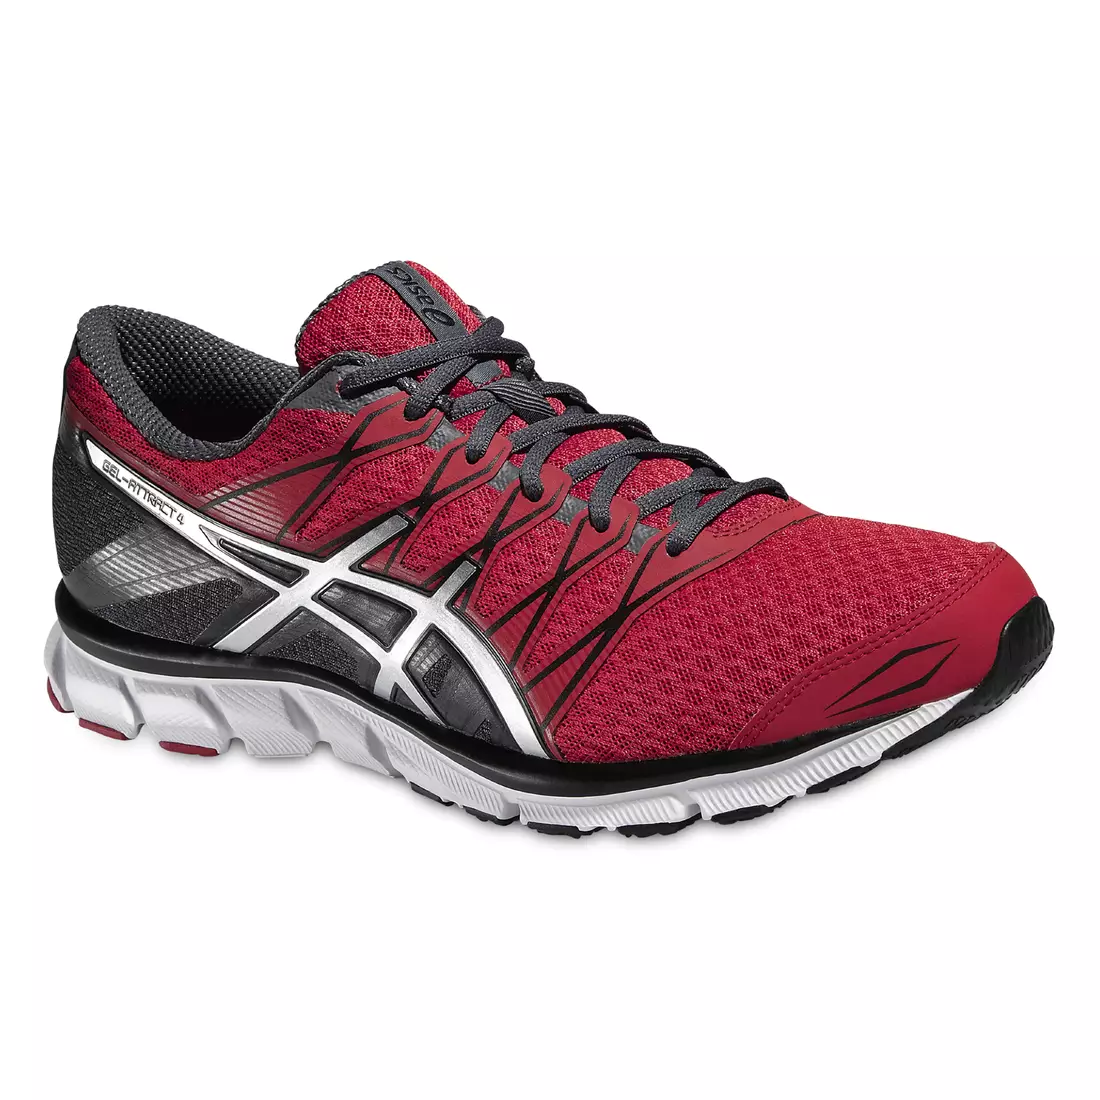 ASICS GEL-ATTRACT 4 running shoes T5K1N 2393